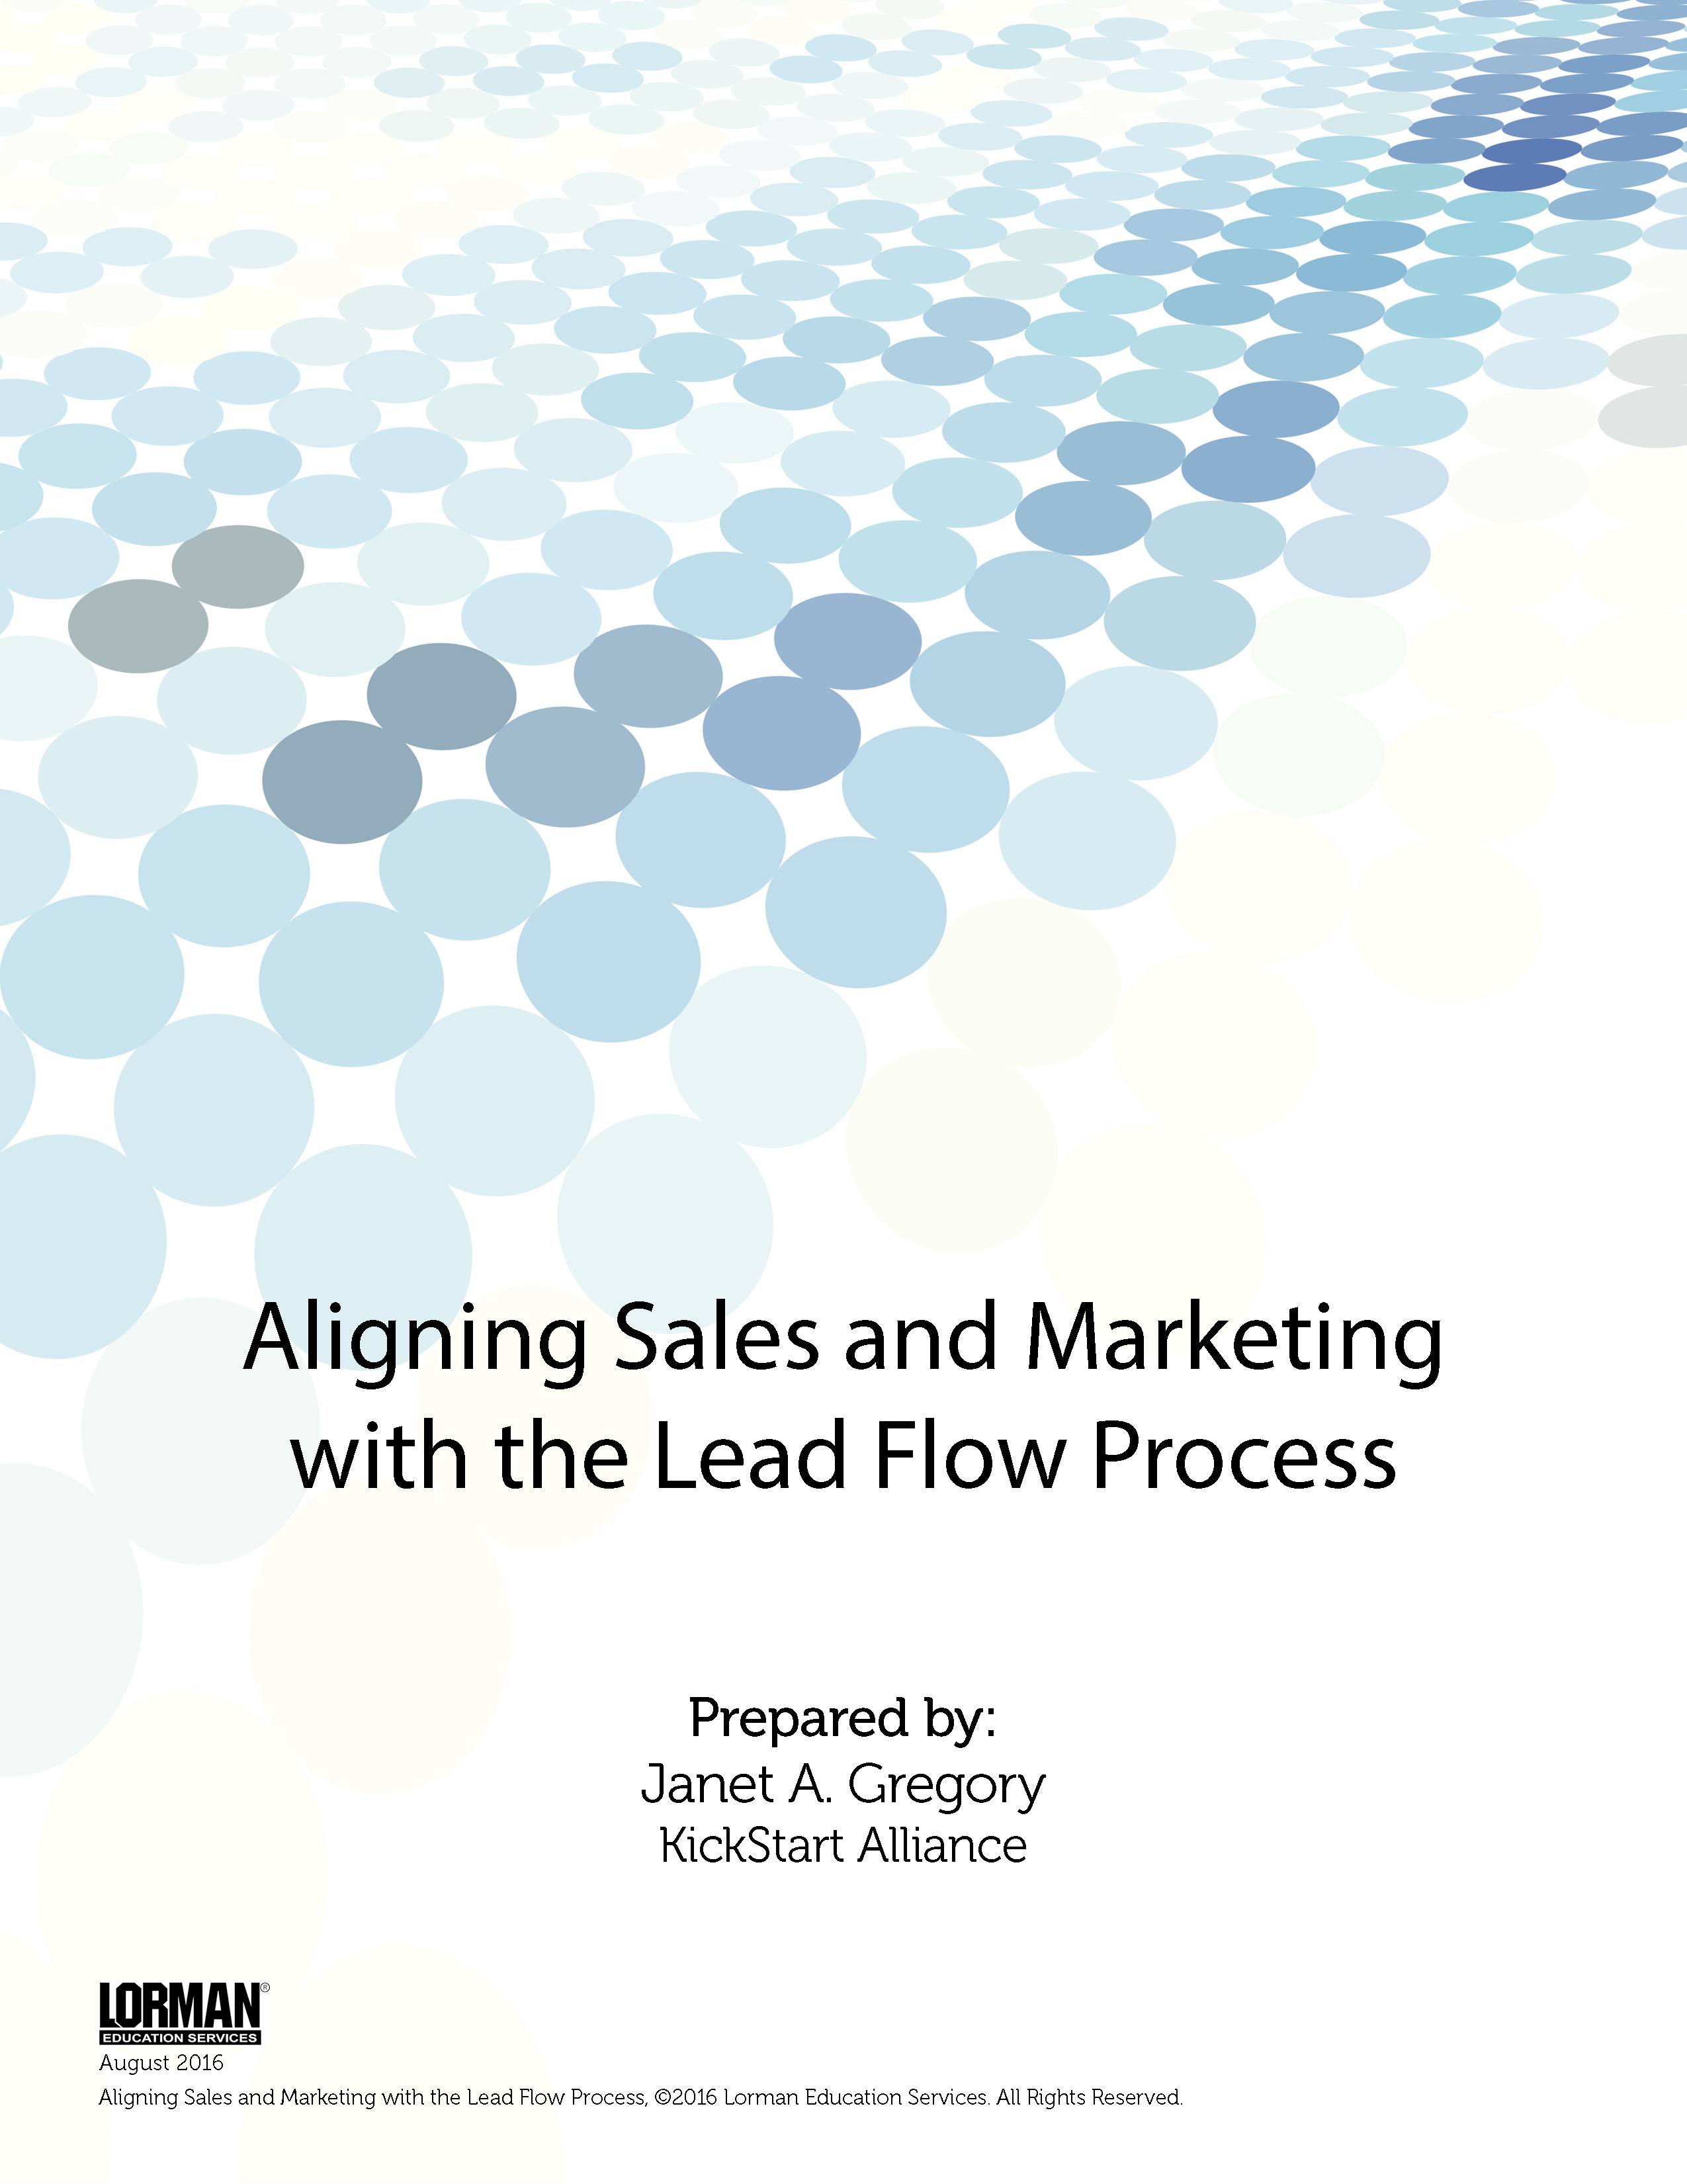 Aligning Sales and Marketing with the Lead Flow Process